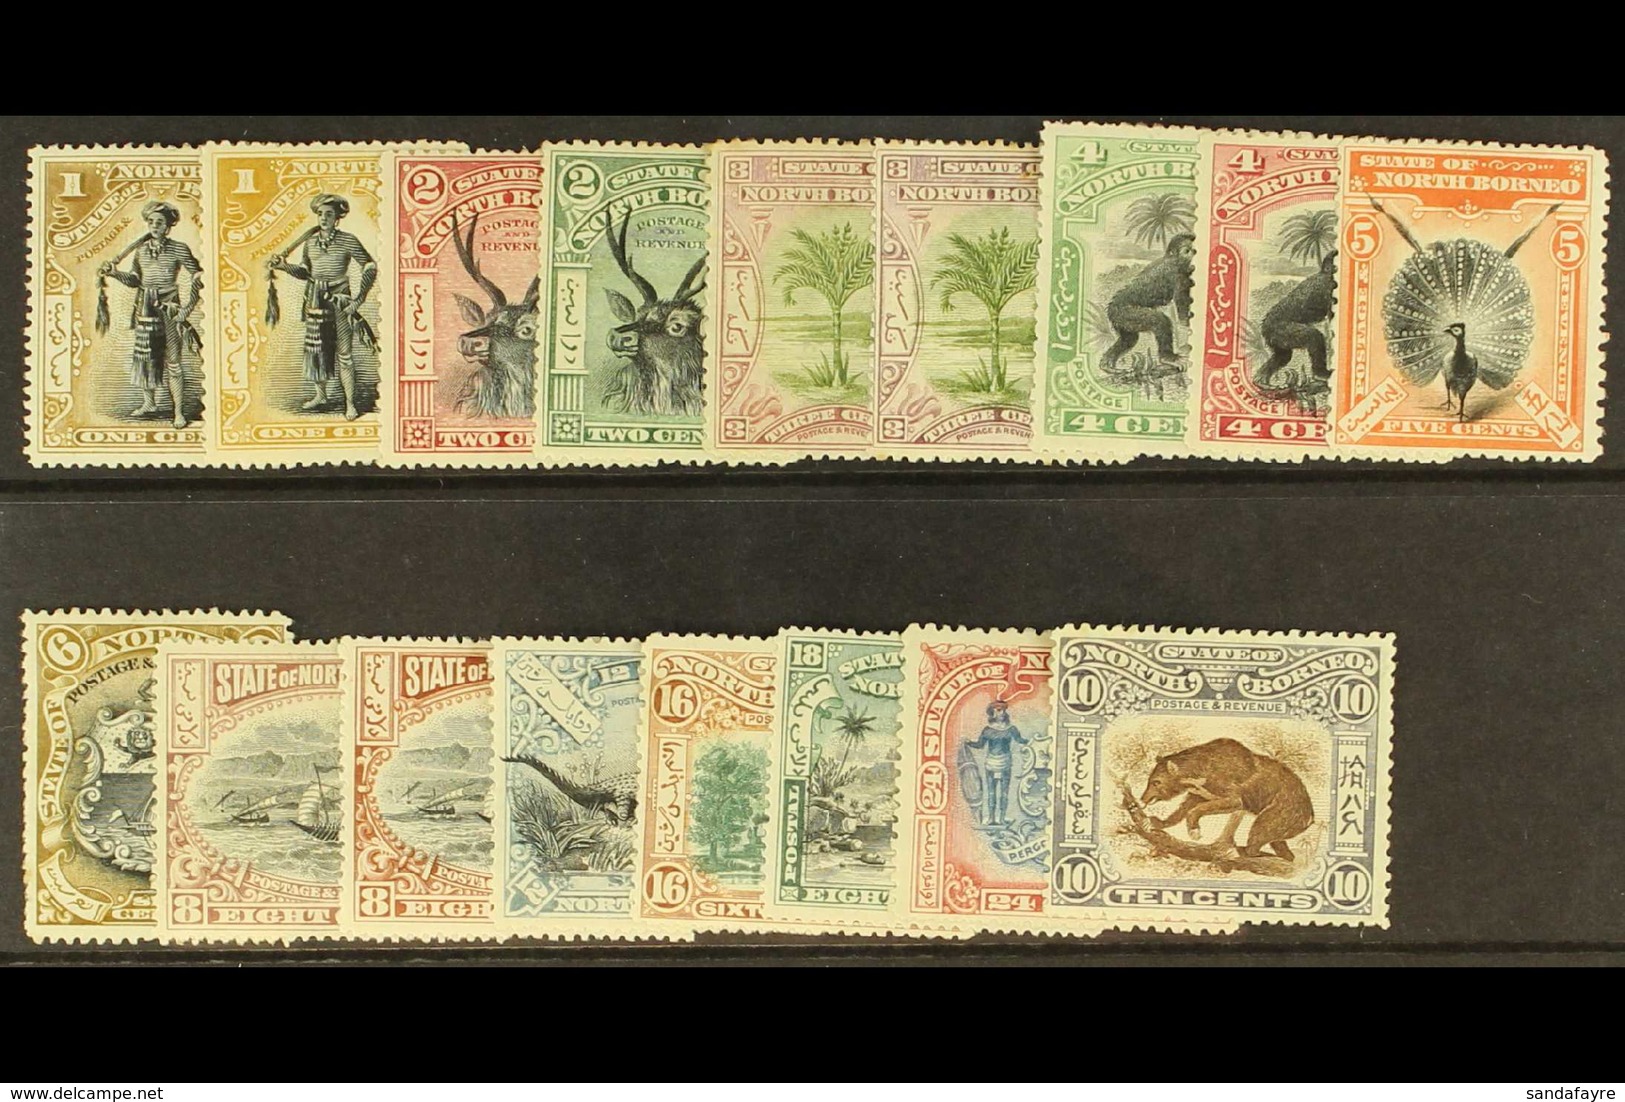 1897-1902  Pictorial Set, SG 92/109, Plus Listed 1c, 3c And 8c Shades, Mainly Fine Mint, The 12c With Small Thin. (17 St - Noord Borneo (...-1963)